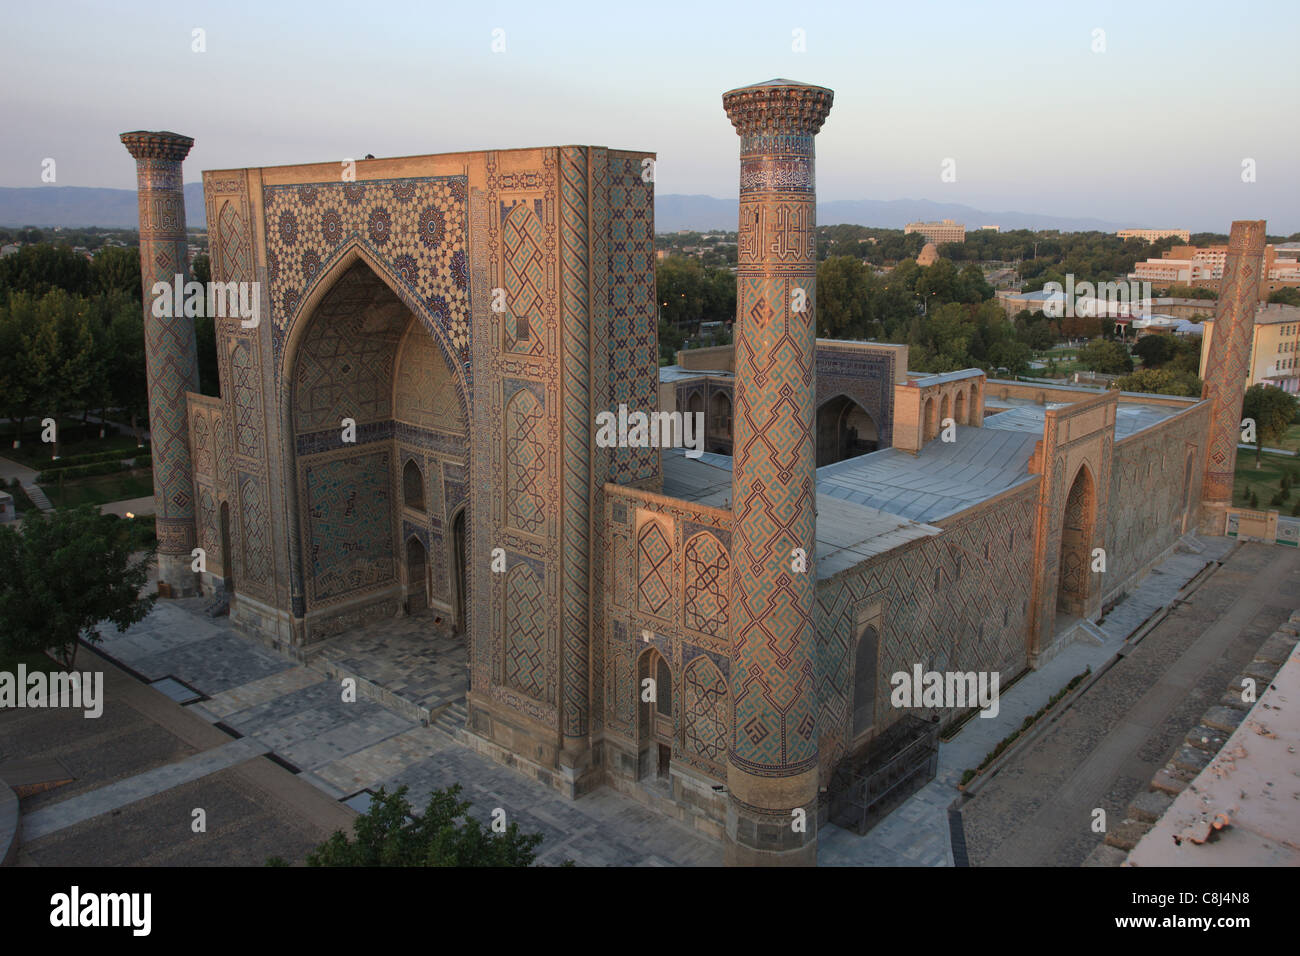 Samarkand, Alai mountains, oldest inhabited cities in the world, Unesco, Unesco, world heritage, Alexander the Great, the travel Stock Photo